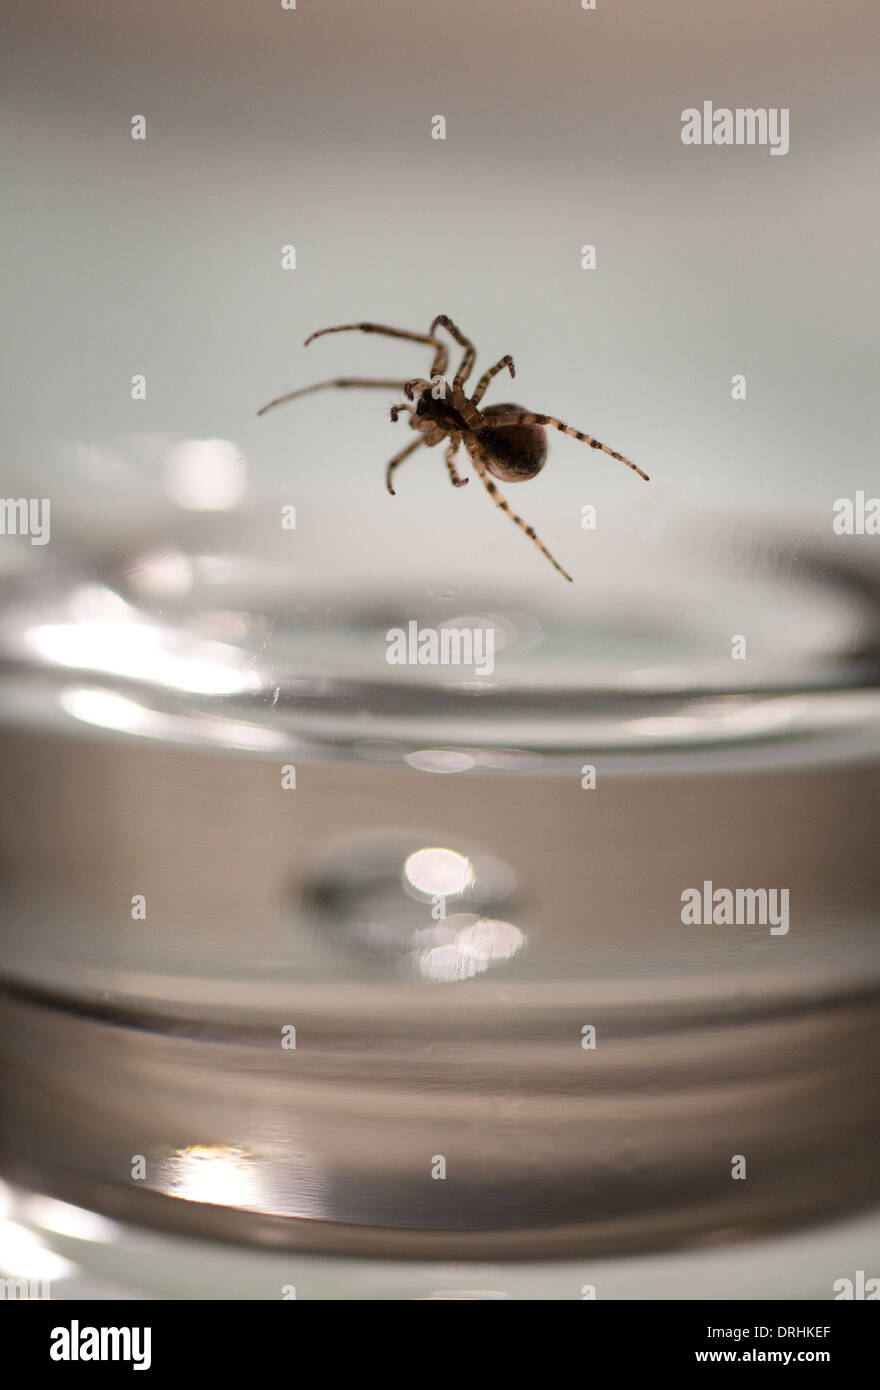 Close-up of a Missing Sector Spider trapped inside a drinking glass Stock Photo